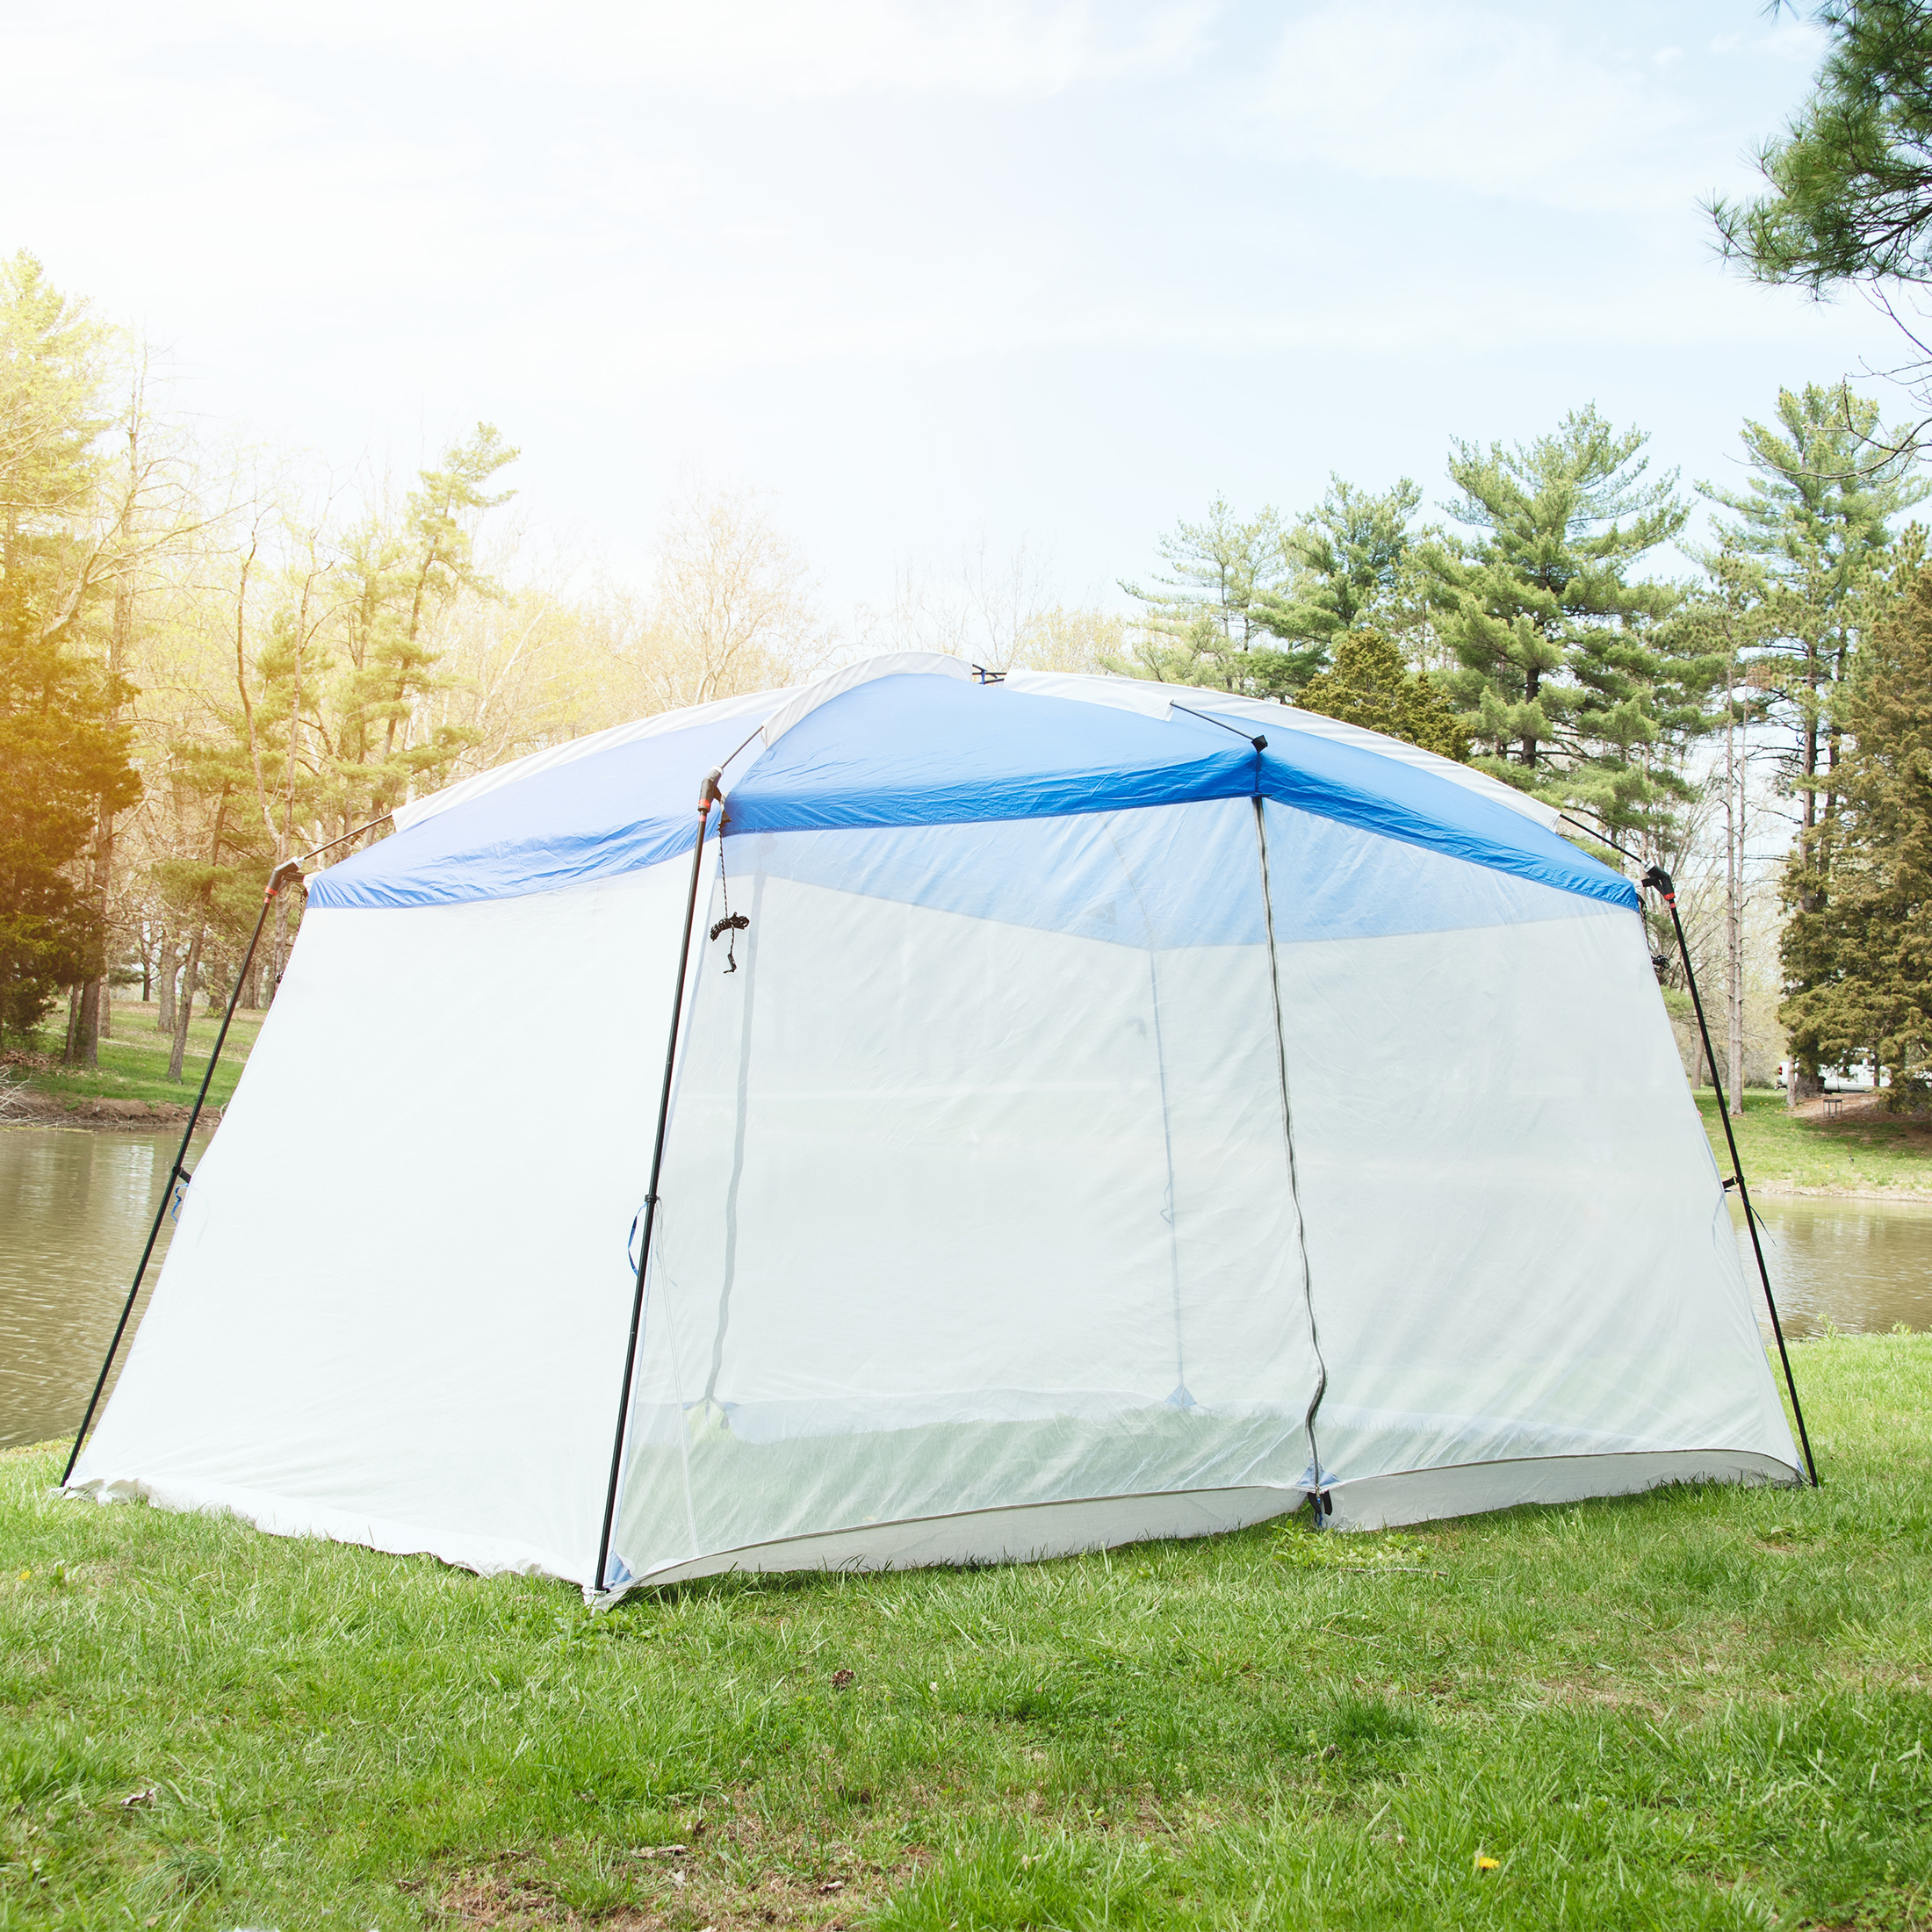 Ozark Trail Screen House Tent, Blue, 13 ft x 9 ft x 84 in - image 3 of 8